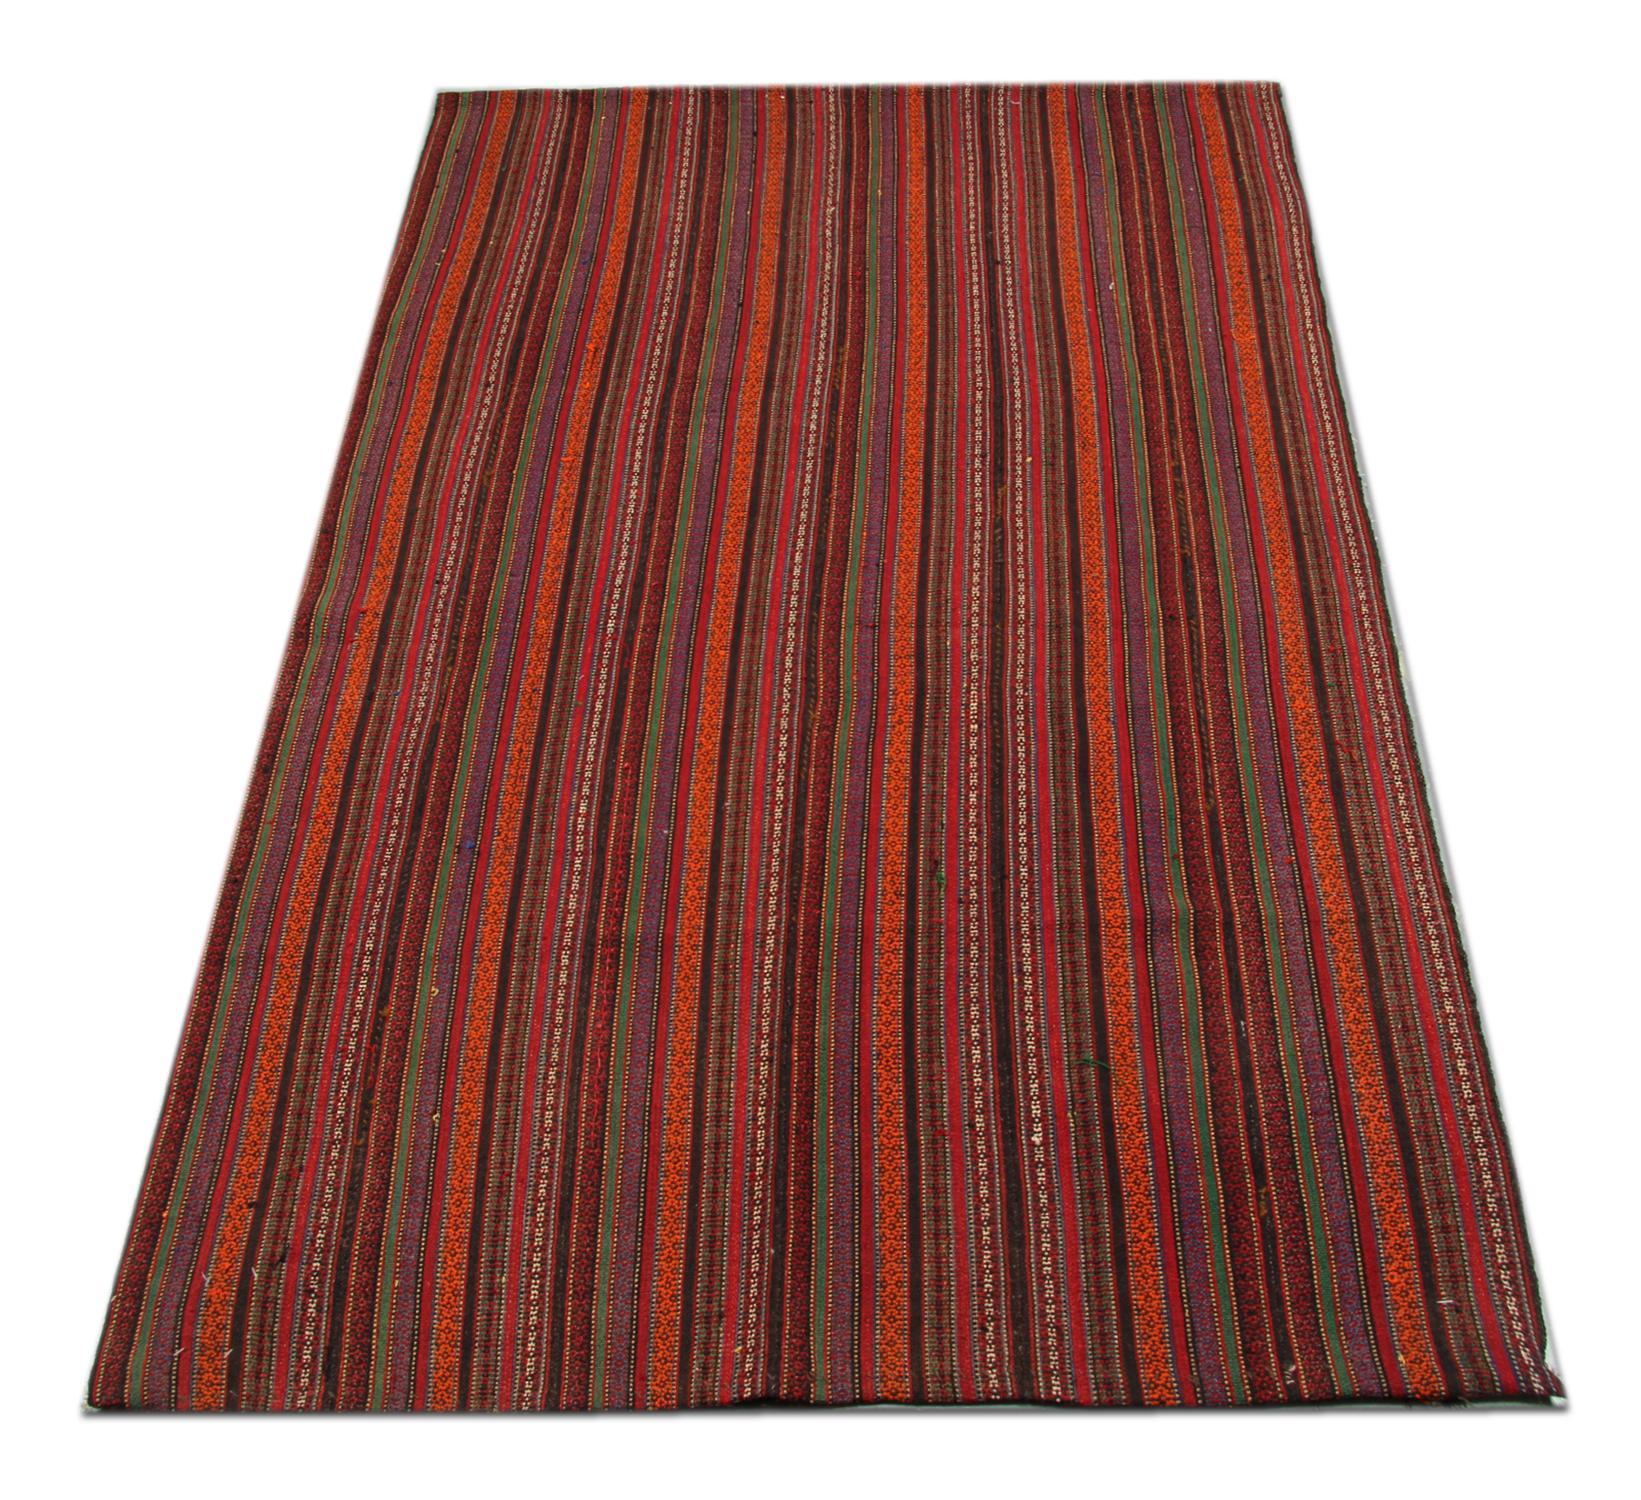 Orange, red, brown and cream make up the elegant striped rug, a geometric pattern woven in this elegant Jajim. Woven by hand with intricacy this textile is sure to make the perfect accent accessory. The traditional stripe design and the simple color